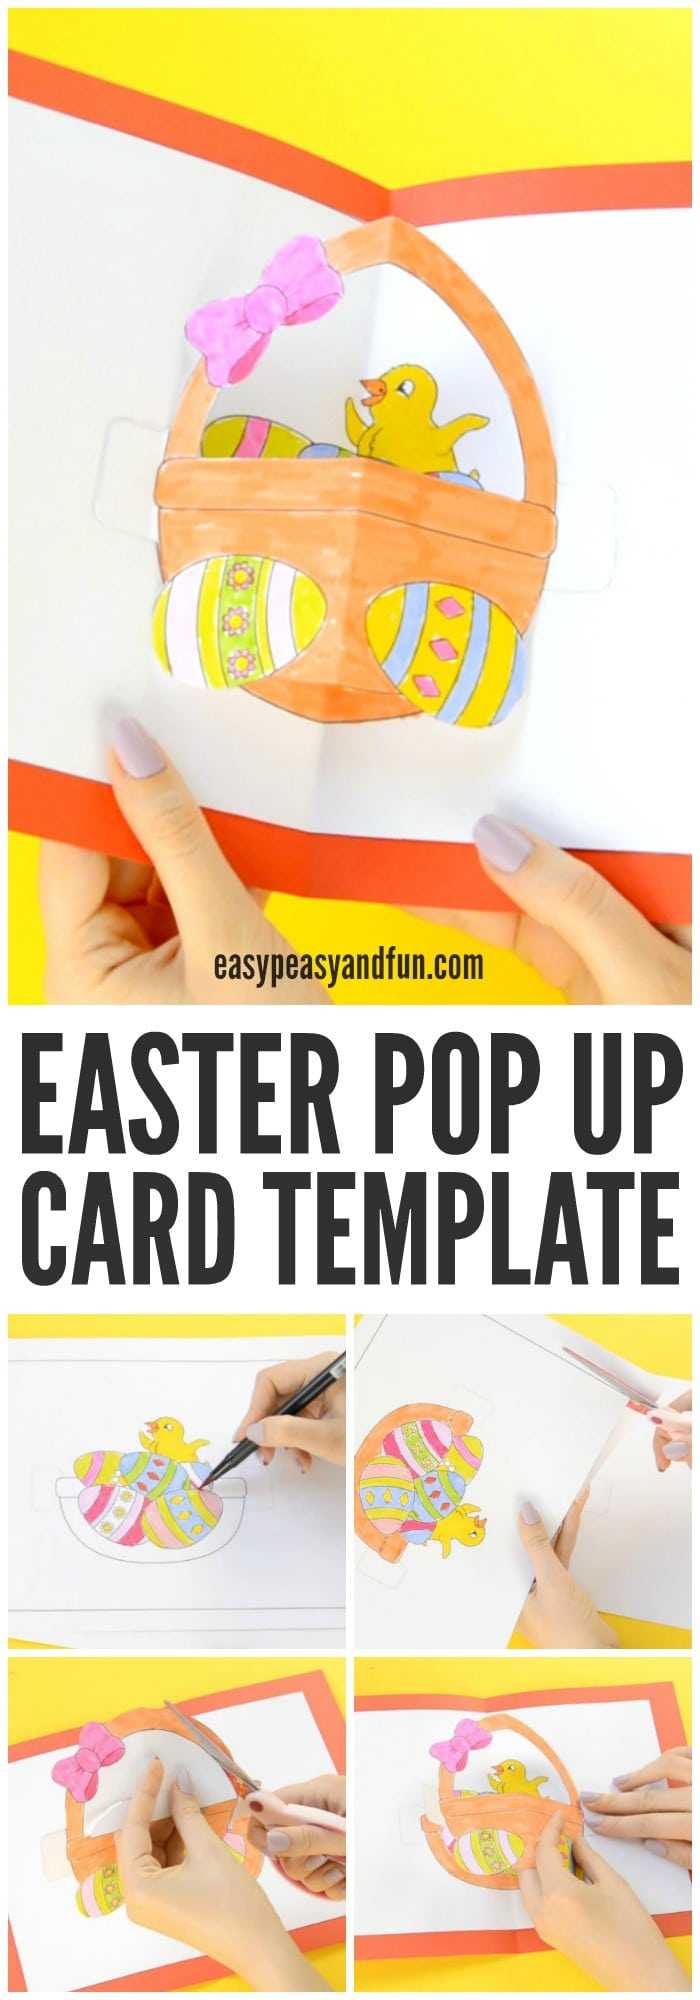 Pop Up Easter Card Template Ks2 – Hd Easter Images With Pertaining To Easter Card Template Ks2